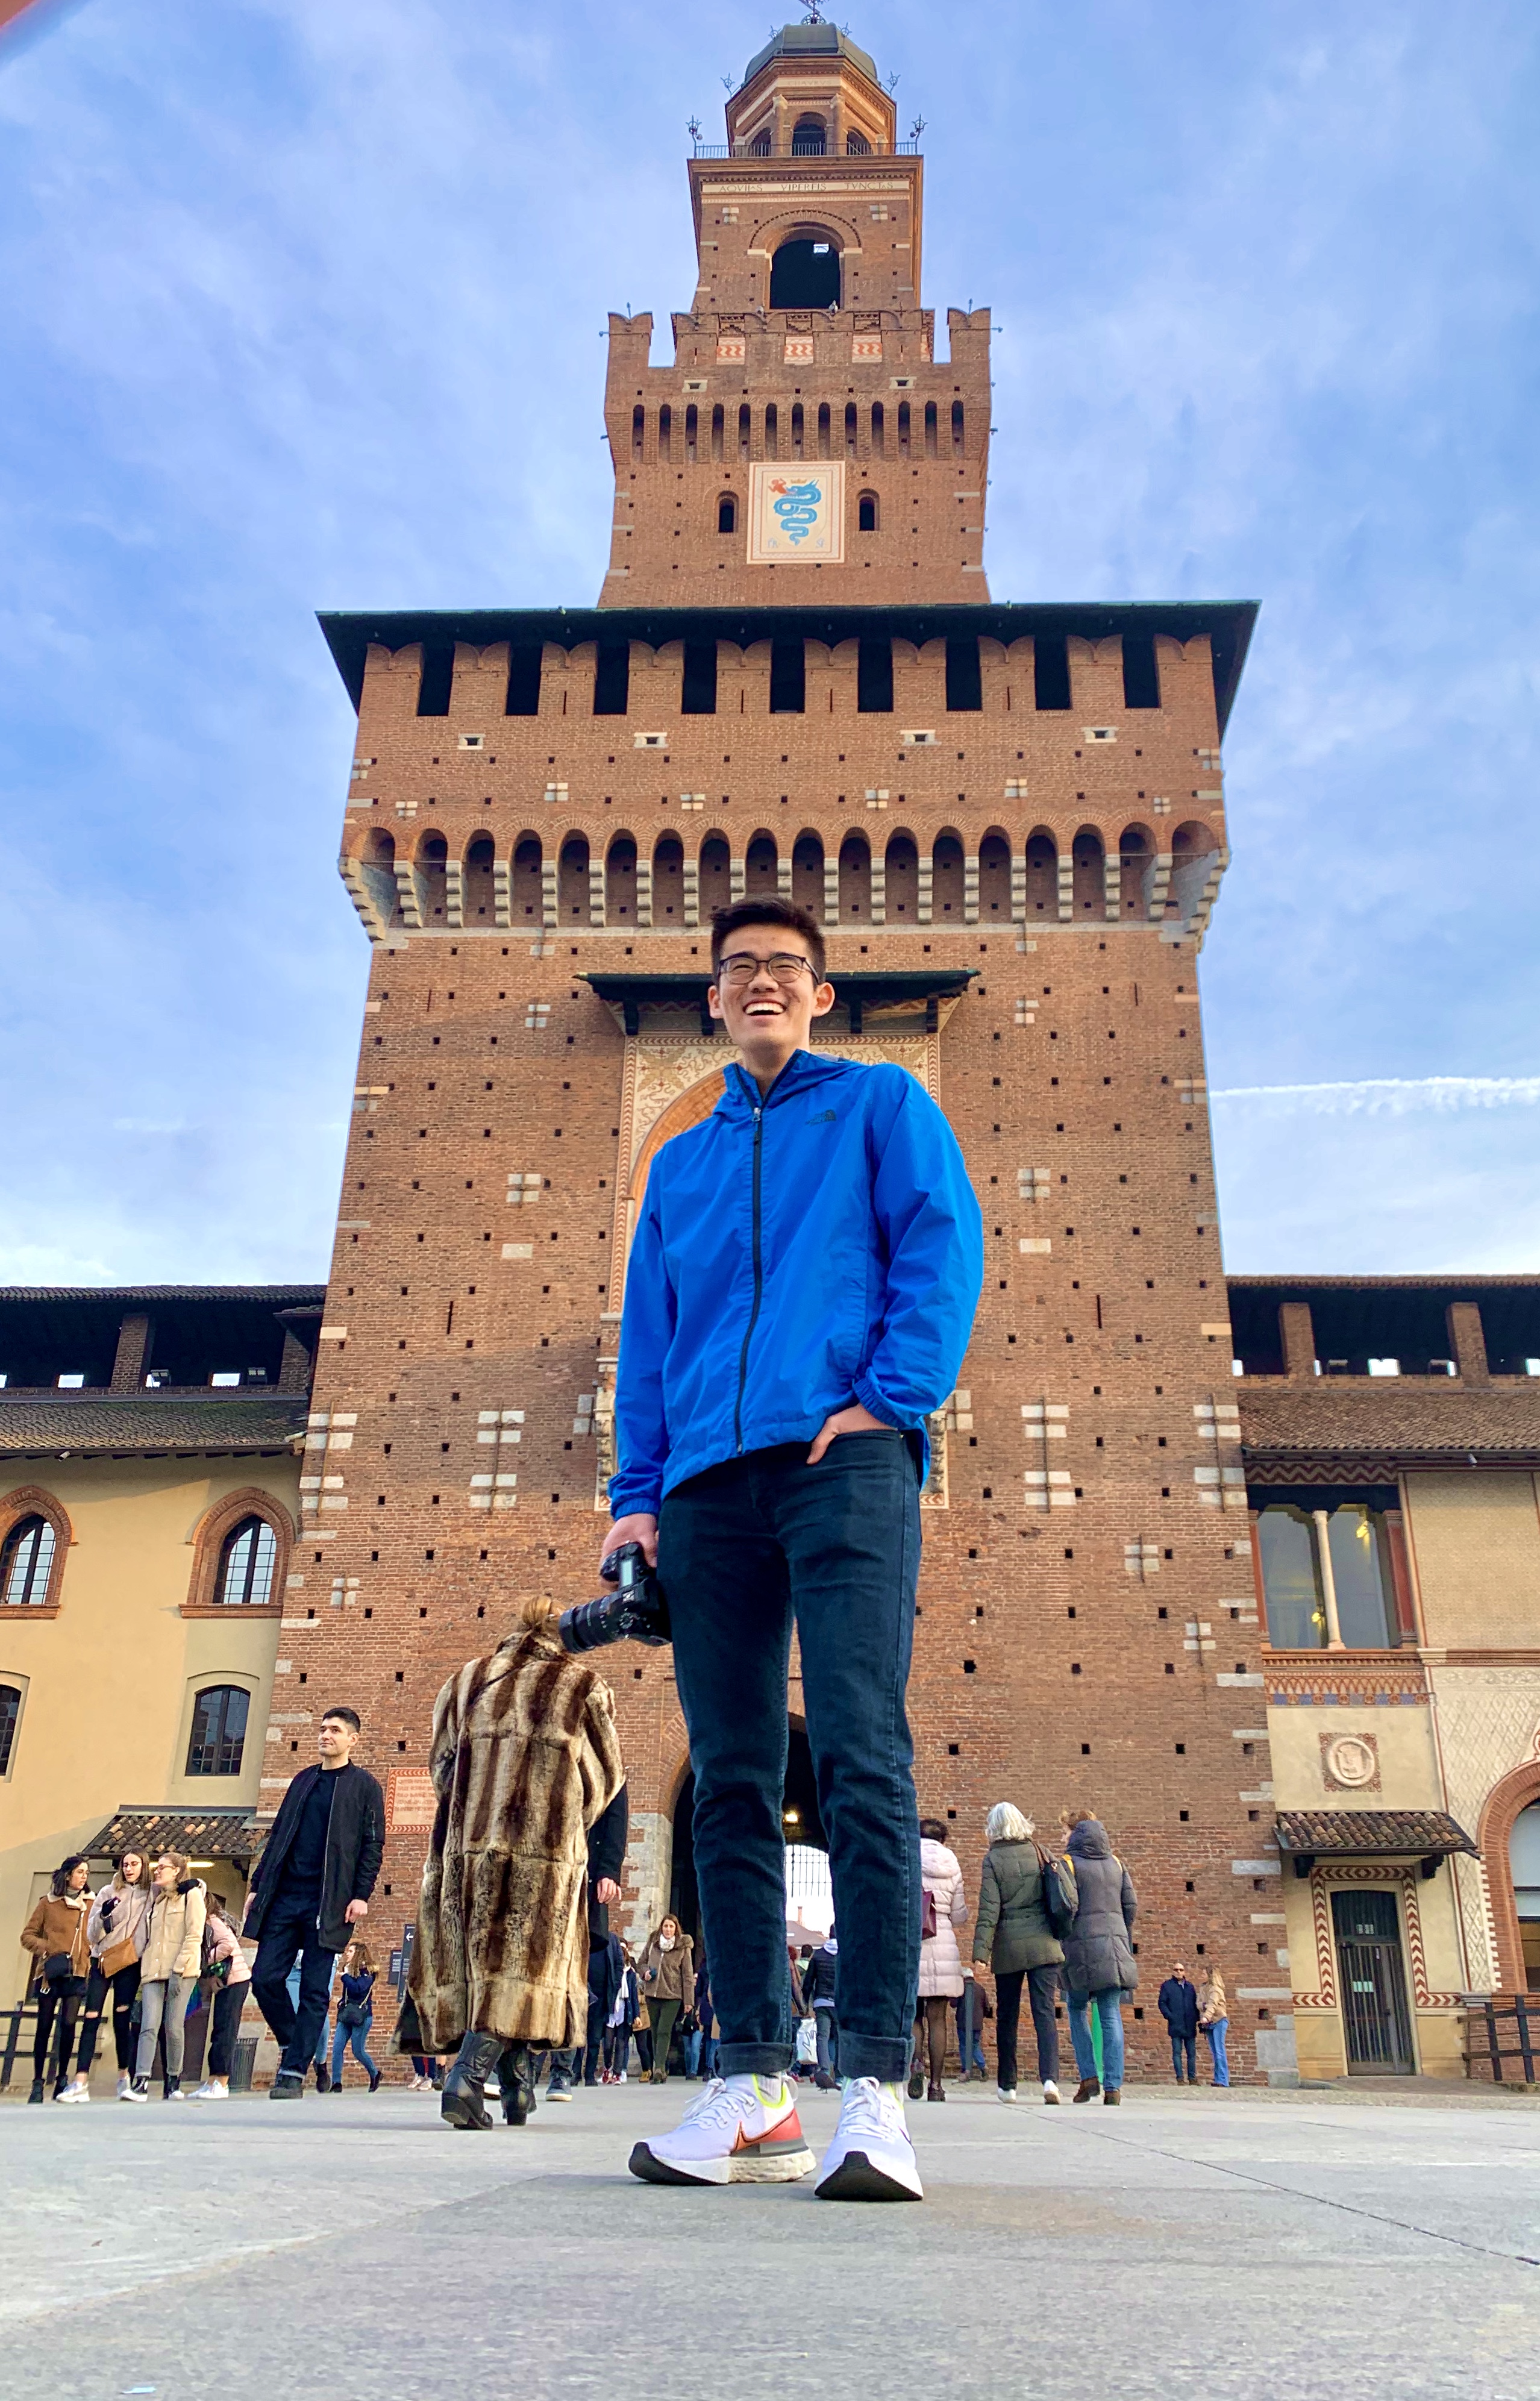 Smiling man in glasses poses in front of a tower